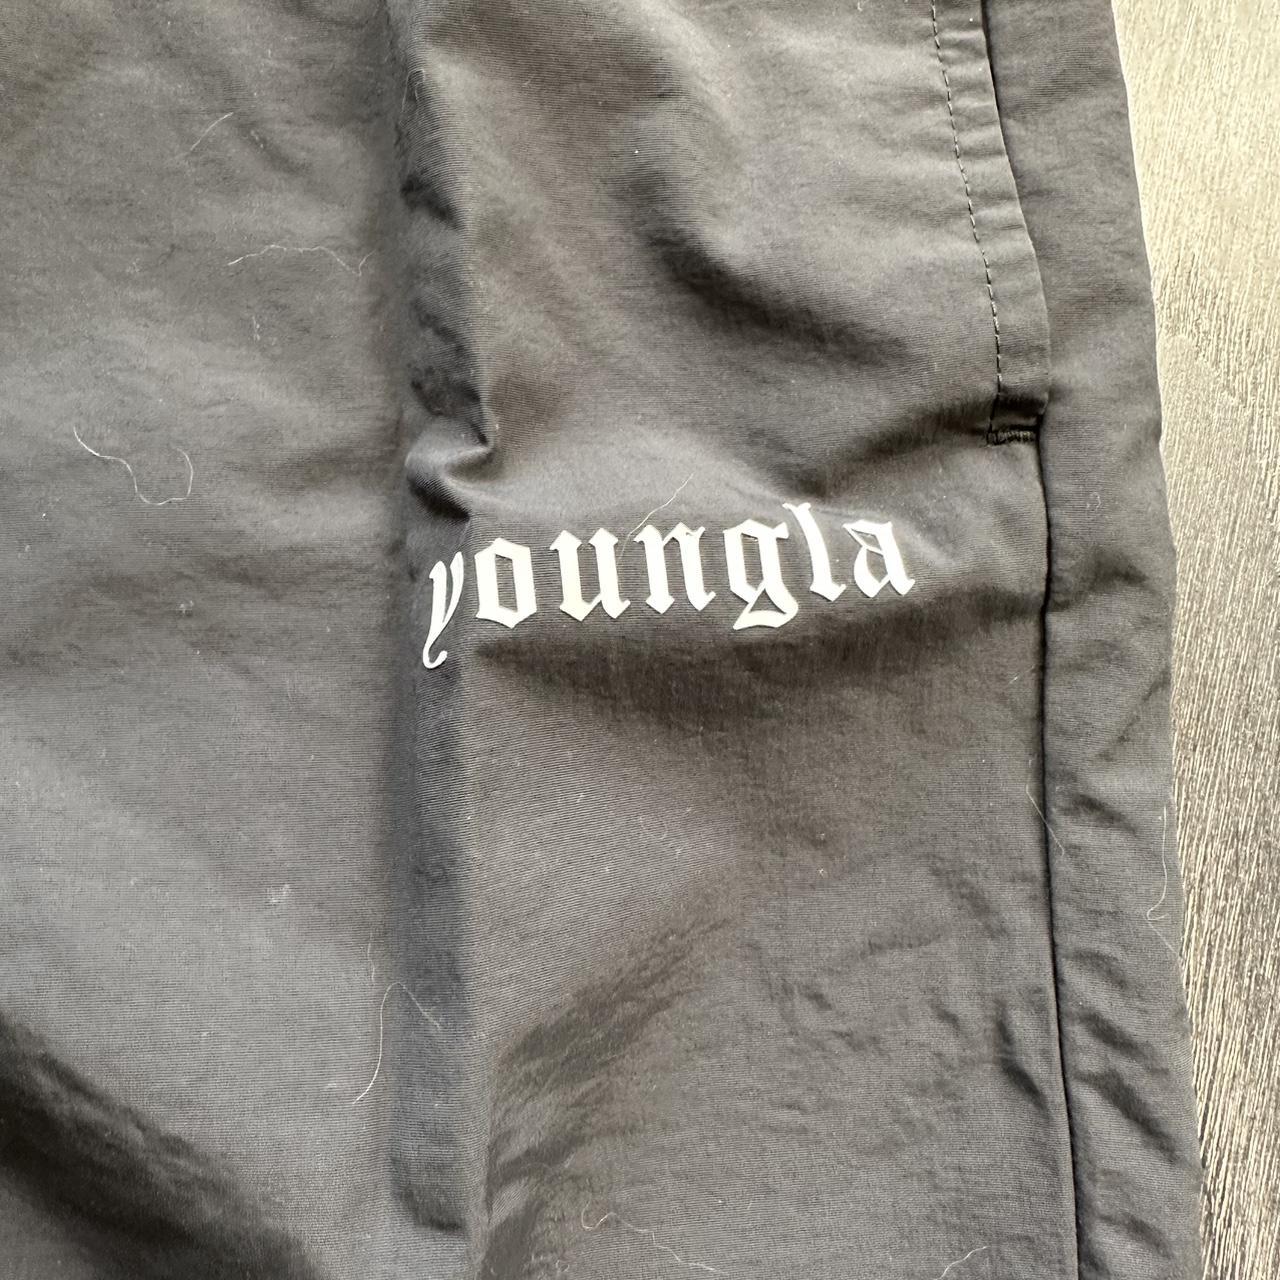 Puffy water/snow resistant youngLa pants Worn - Depop